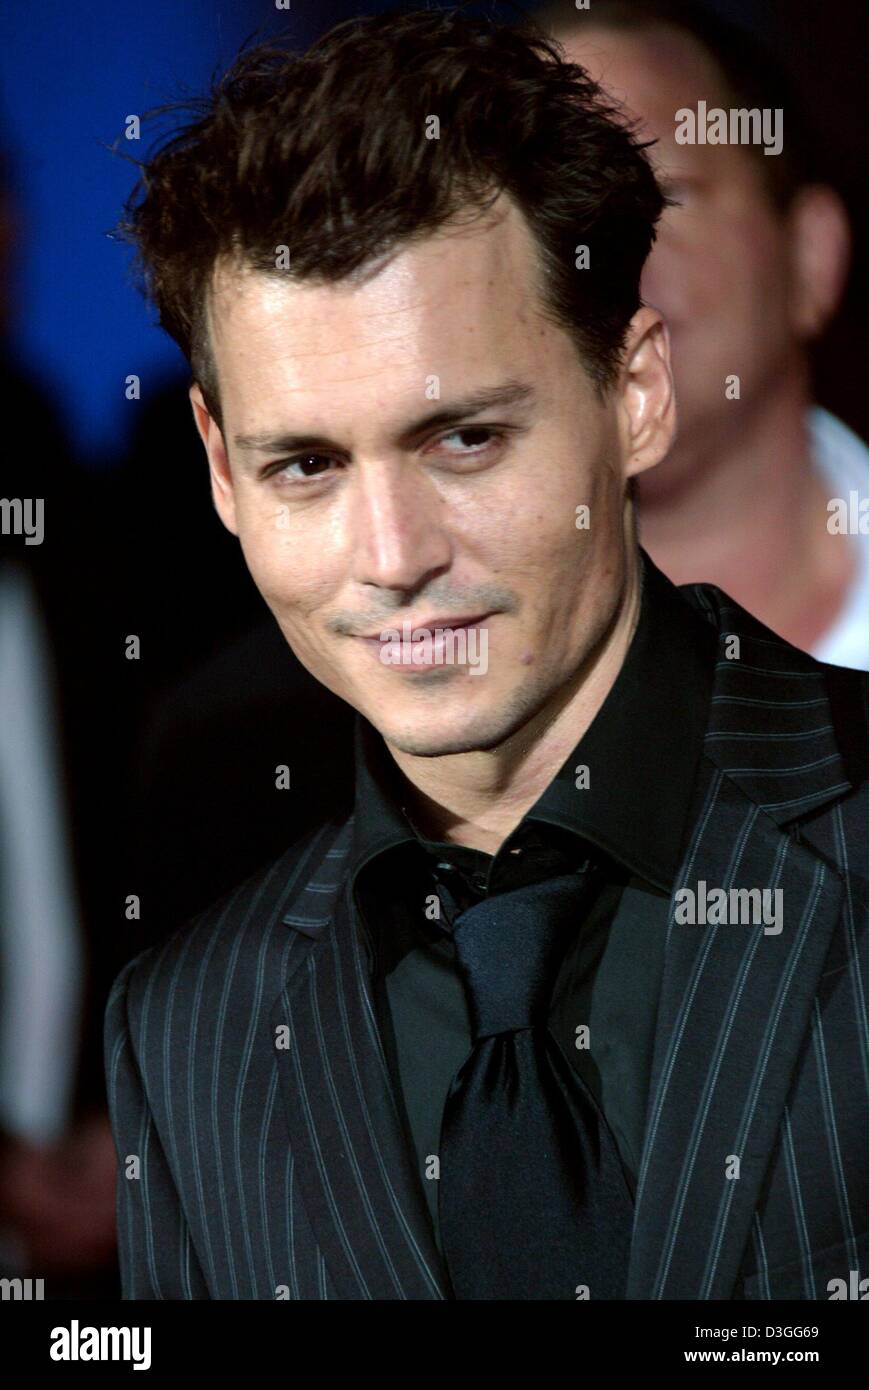 (dpa) - US actor Johnny Depp arrives to the screening of his film 'Finding Neverland' which runs out of competition at the 61st Venice Film Festival, Italy, 4 September 2004. Stock Photo